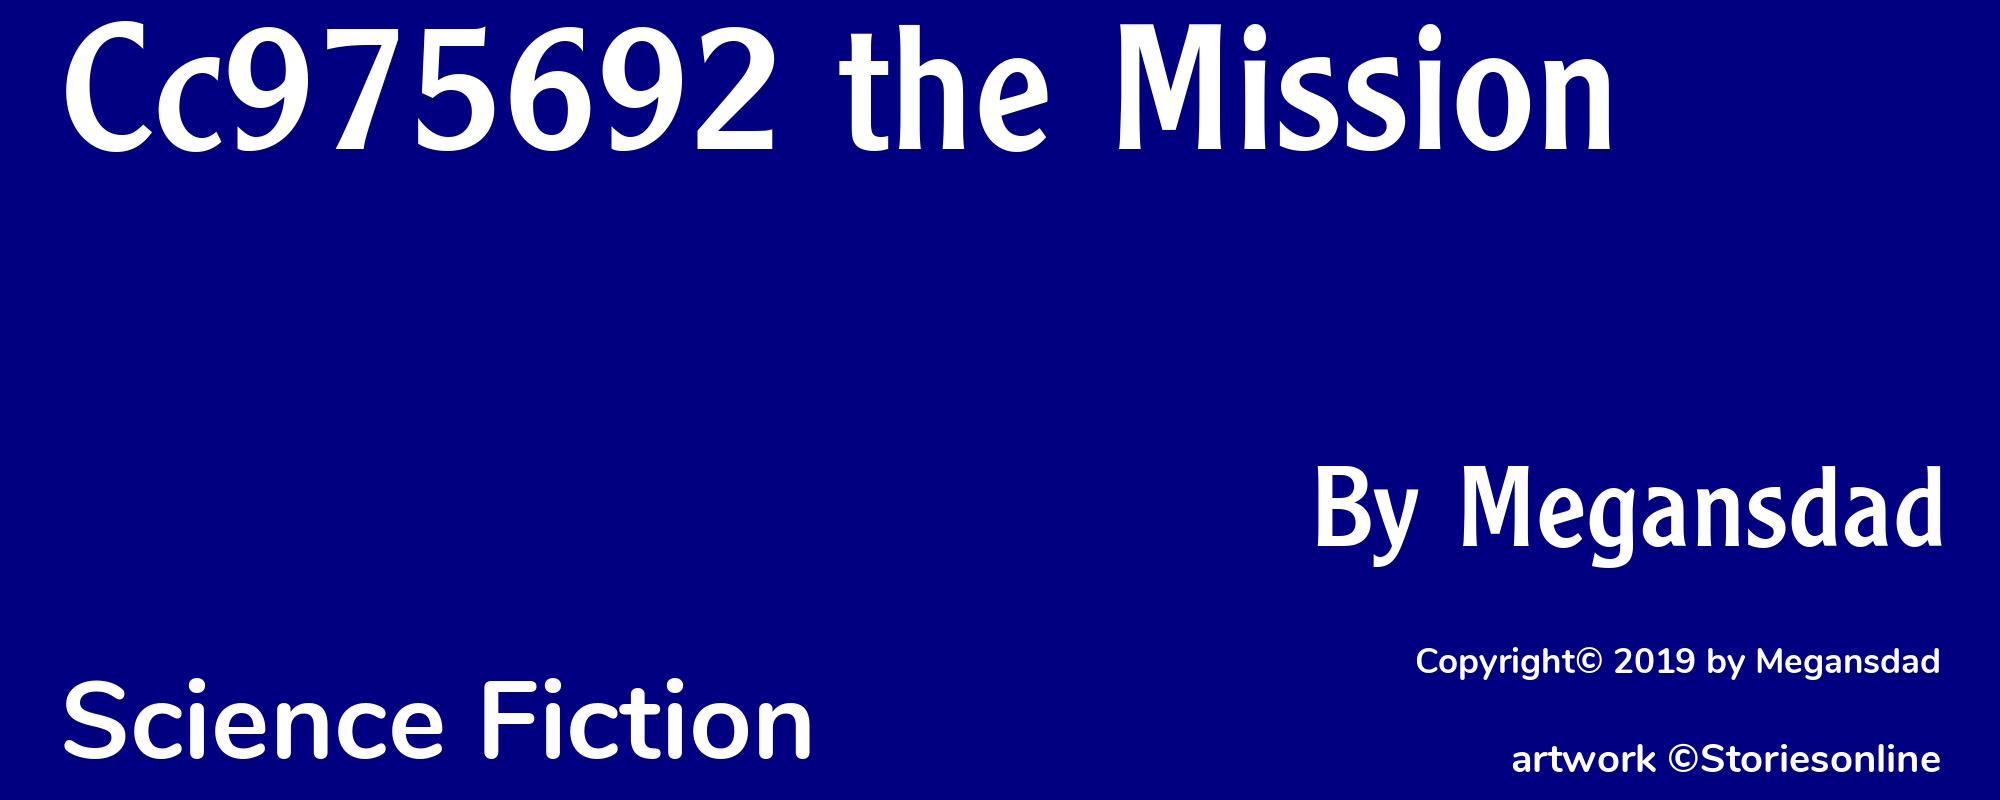 Cc975692 the Mission - Cover